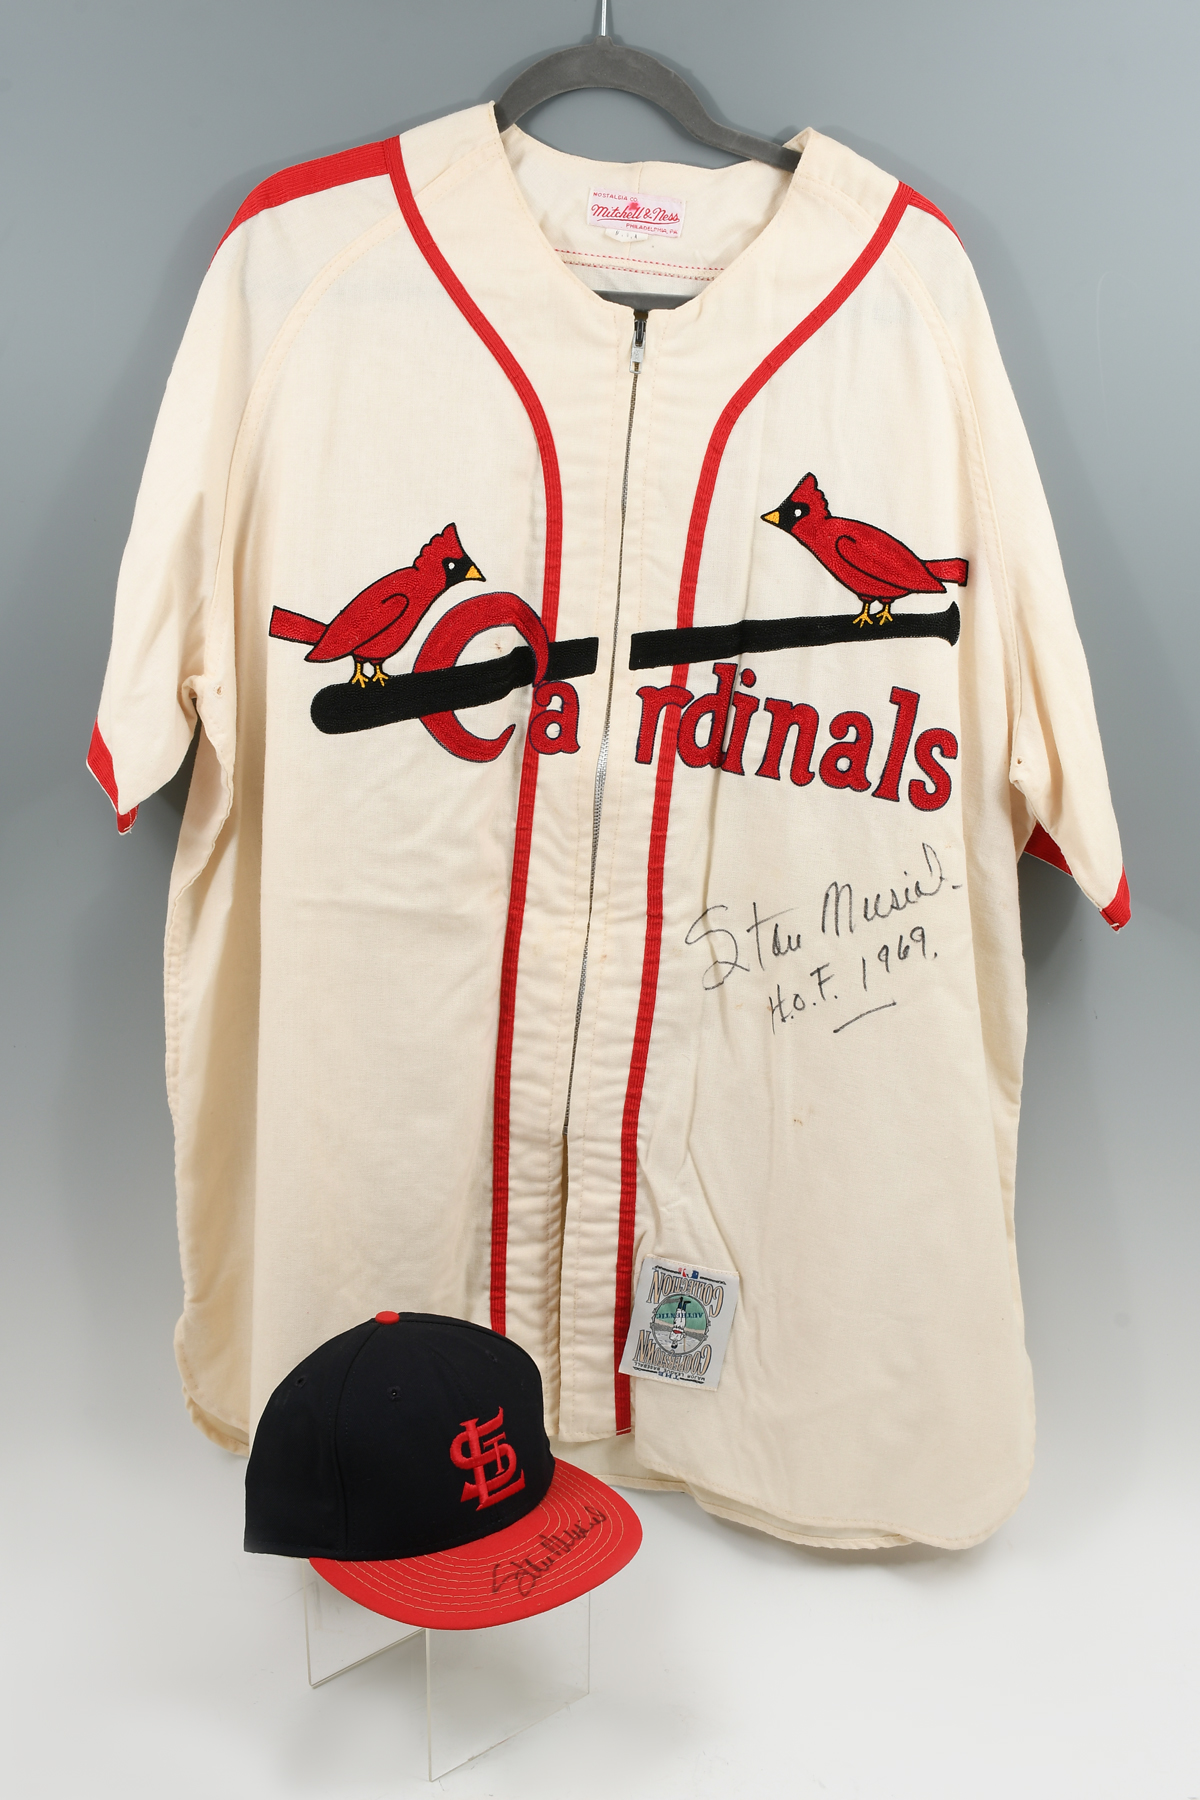 STAN MUSIAL AUTOGRAPHED JERSEY AND HAT: